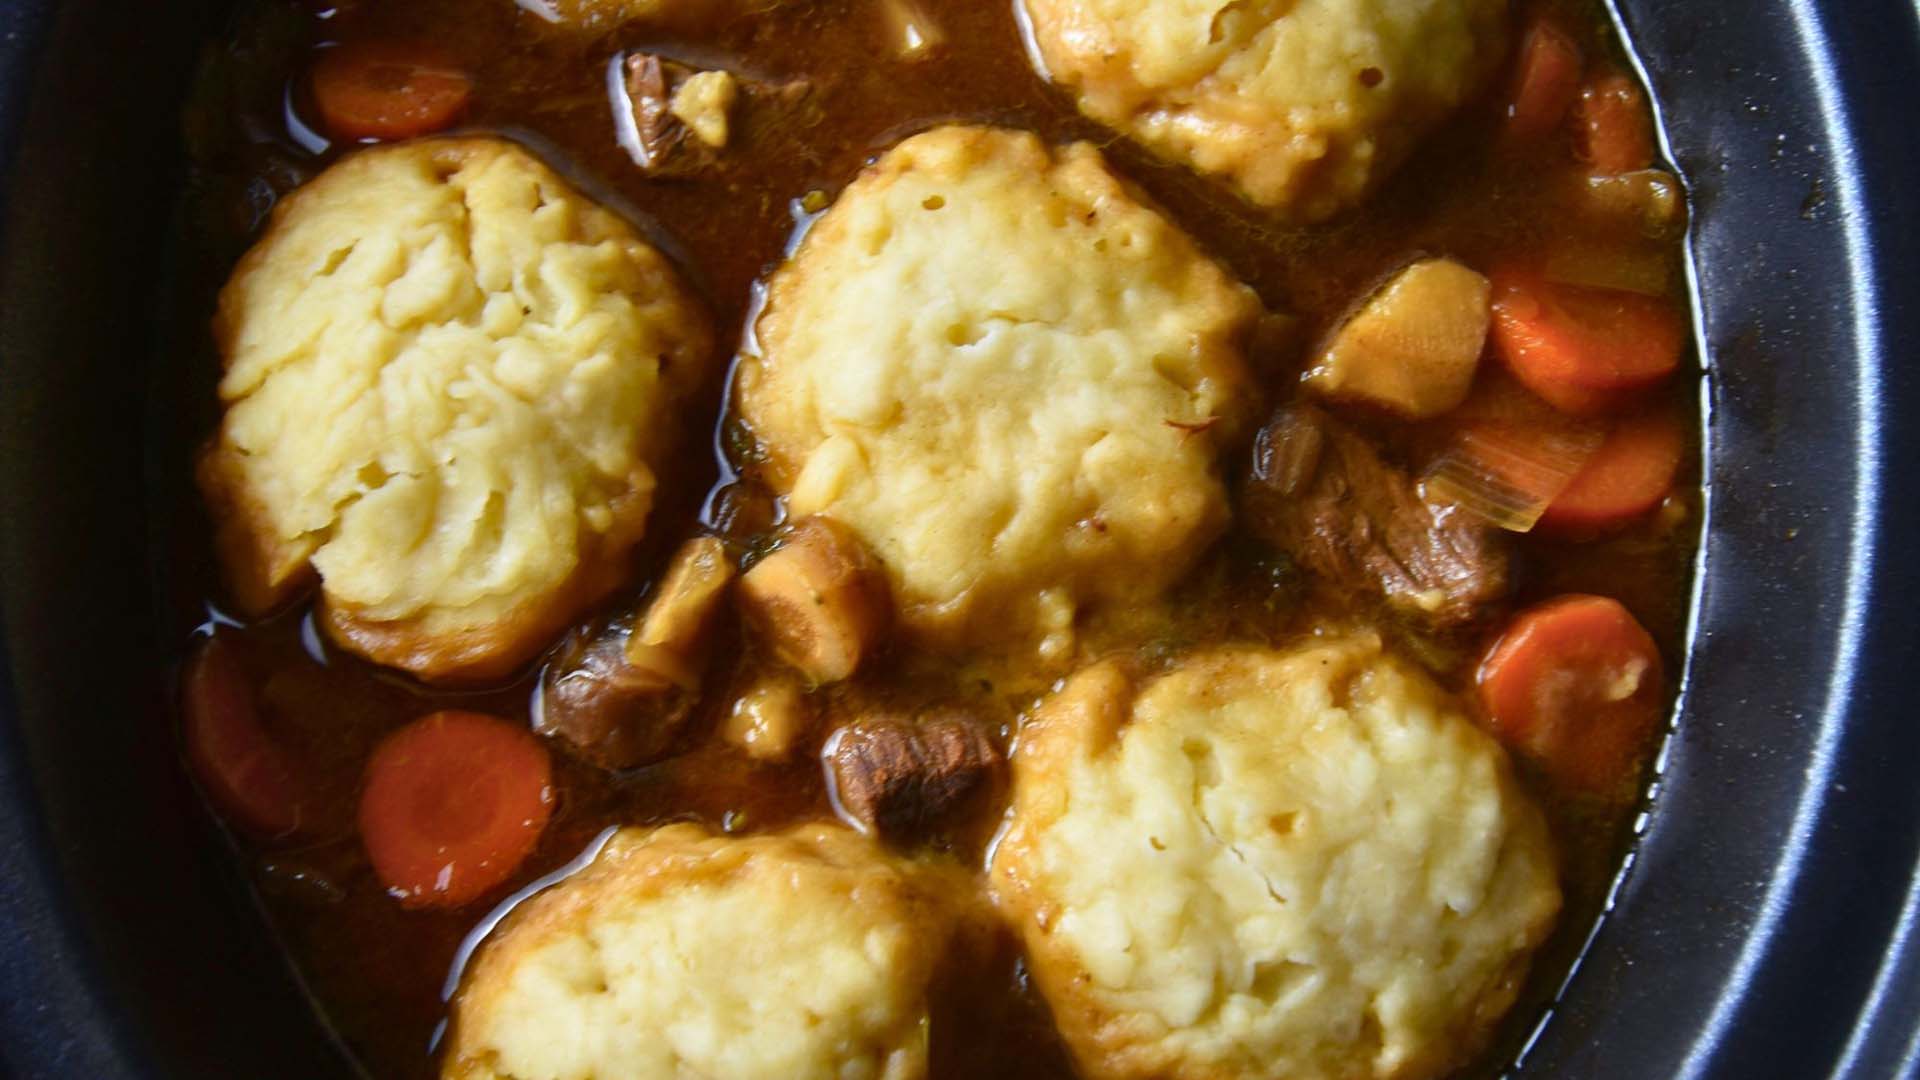 Stew and dumplings in a slow cooker